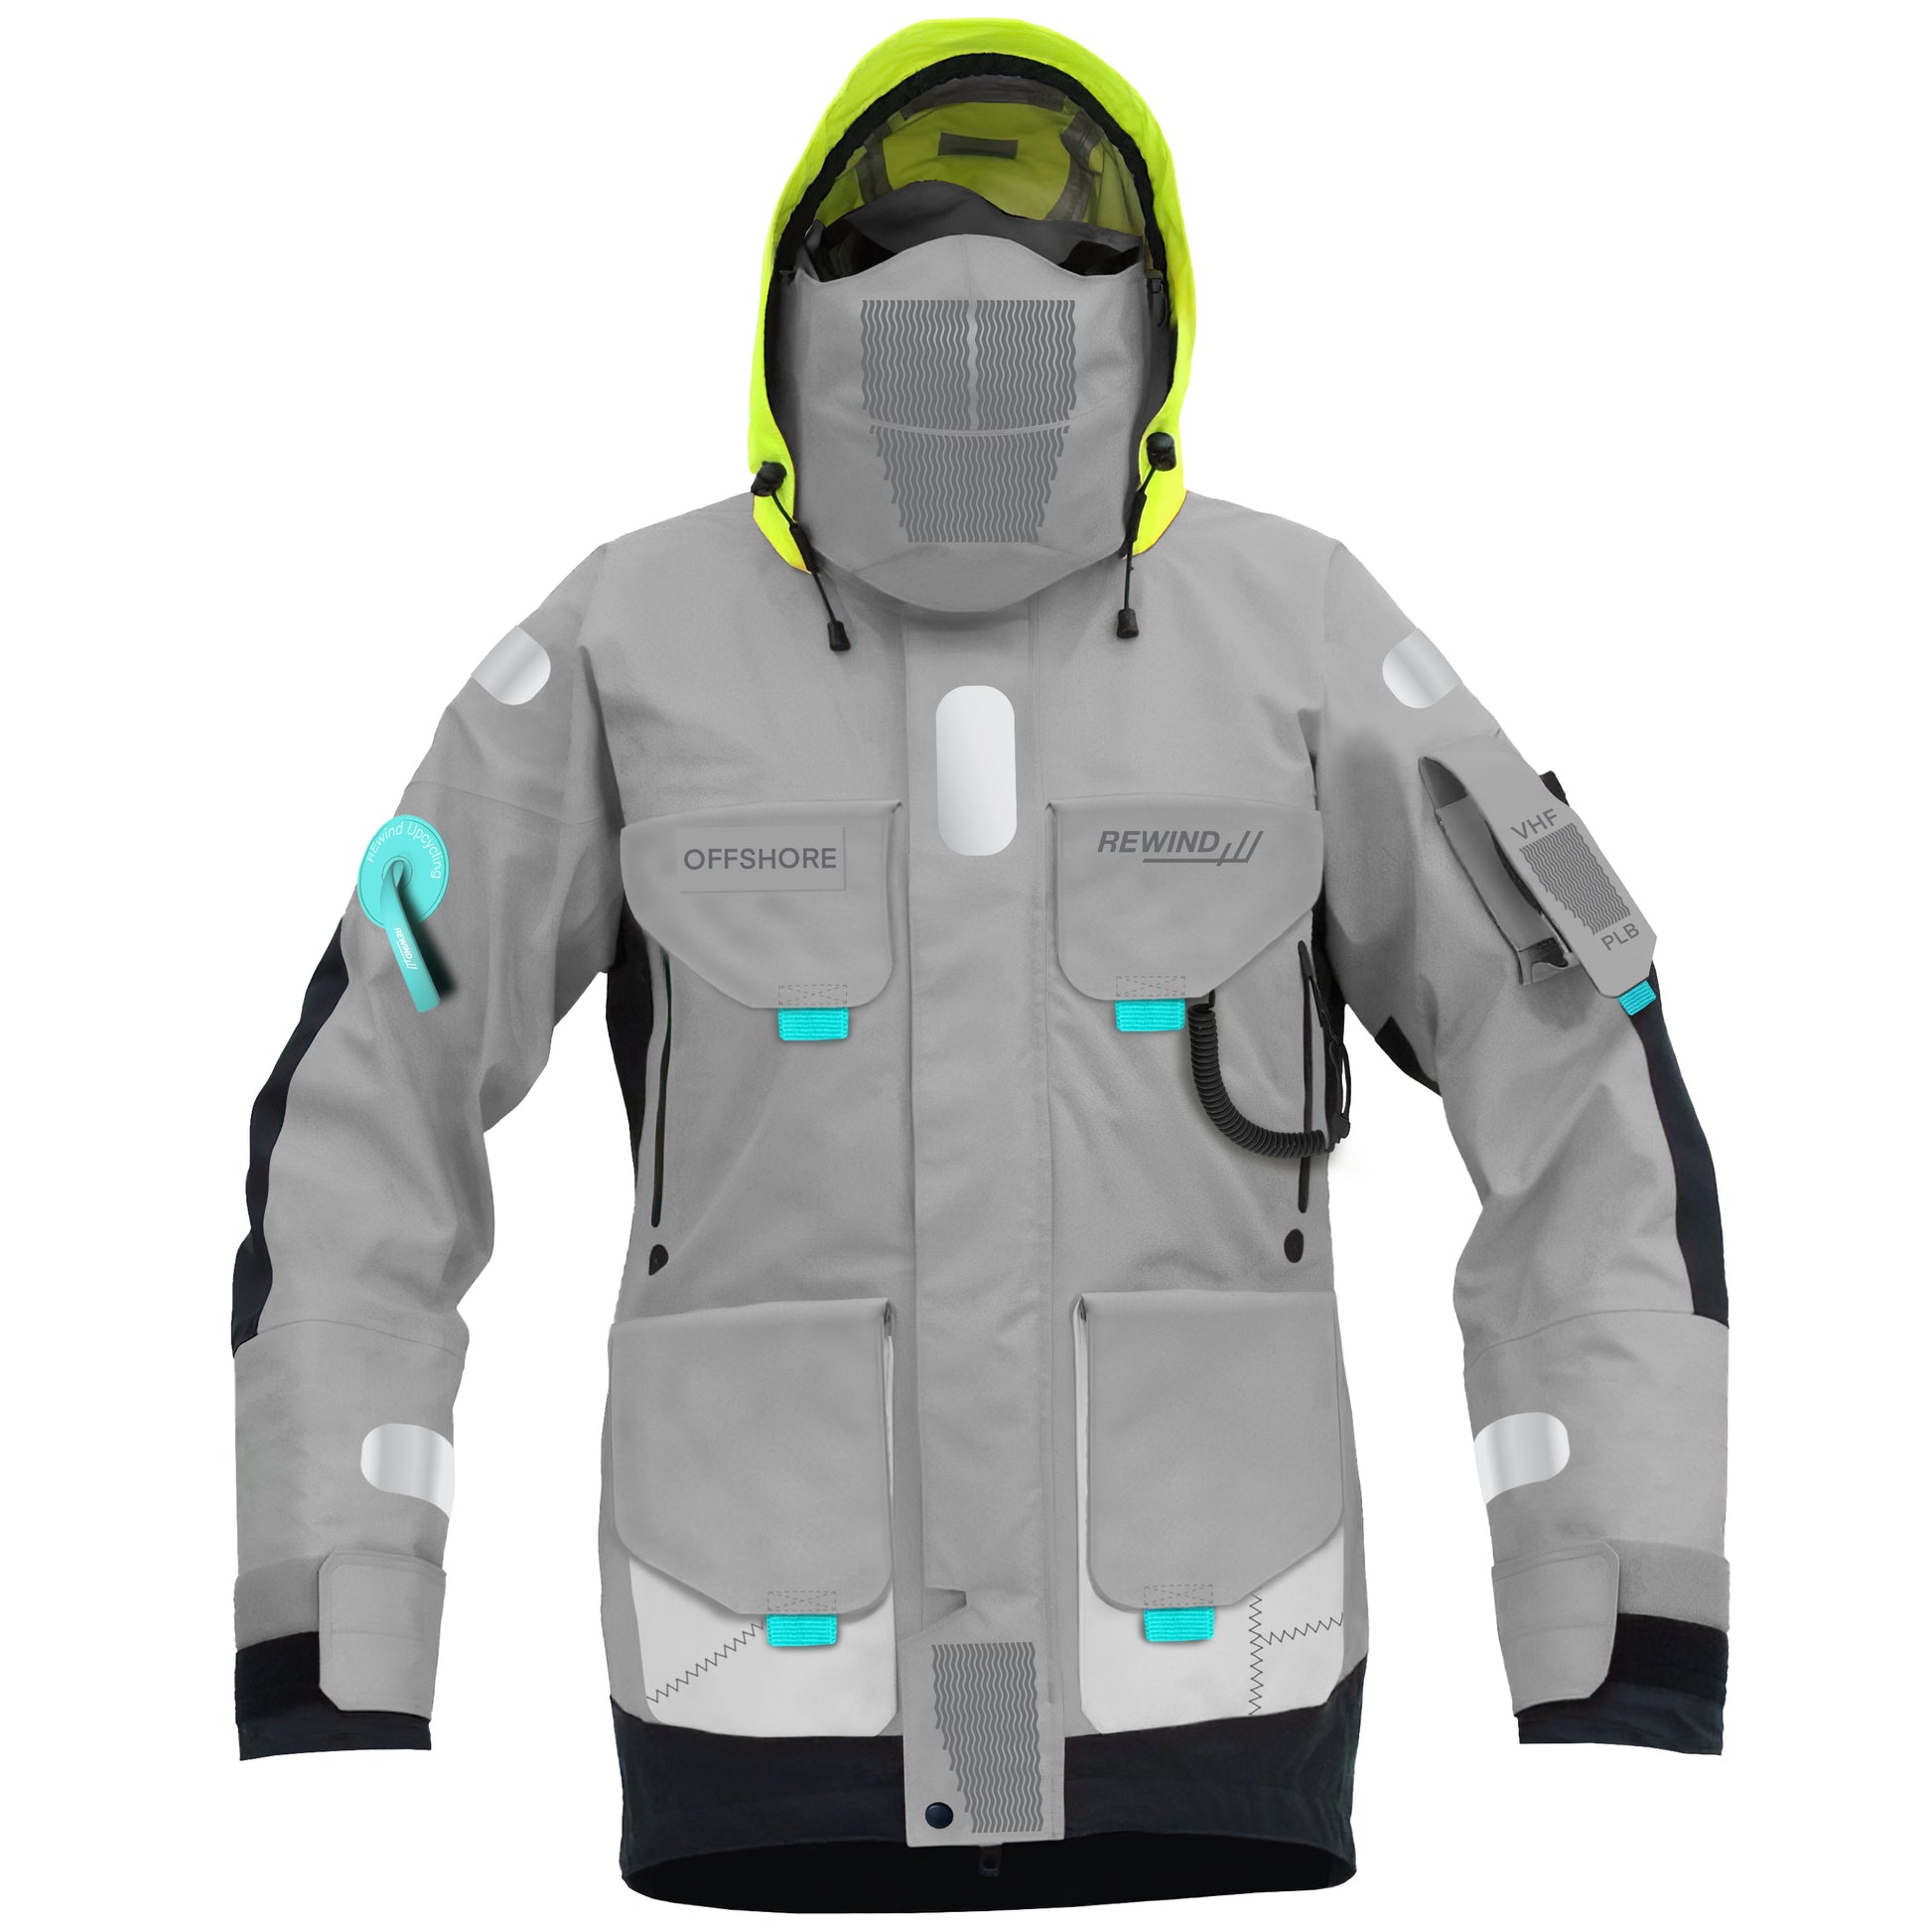 Offshore Yacht Jacket GRAY - sailing ocean jacket. Outfit yacht clothes from REwind